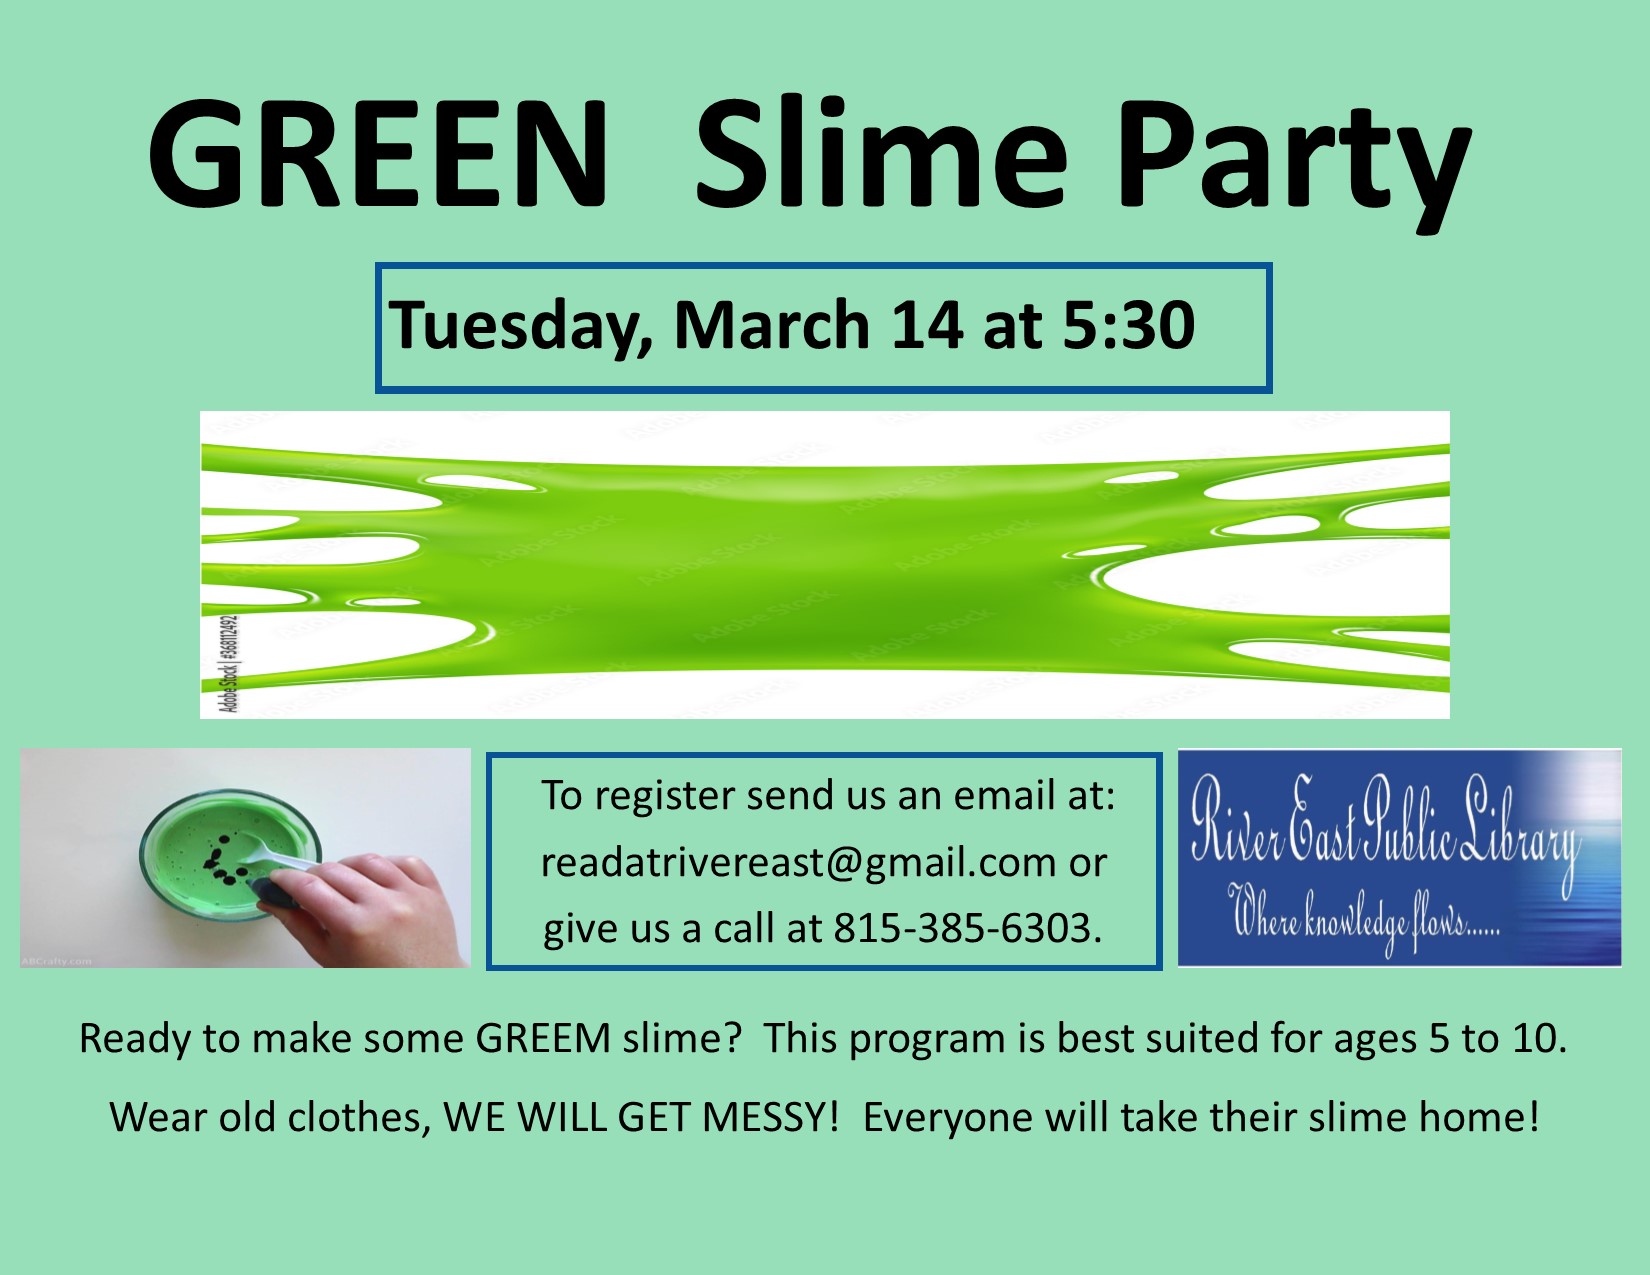 Poster advertising our upcoming green slime party